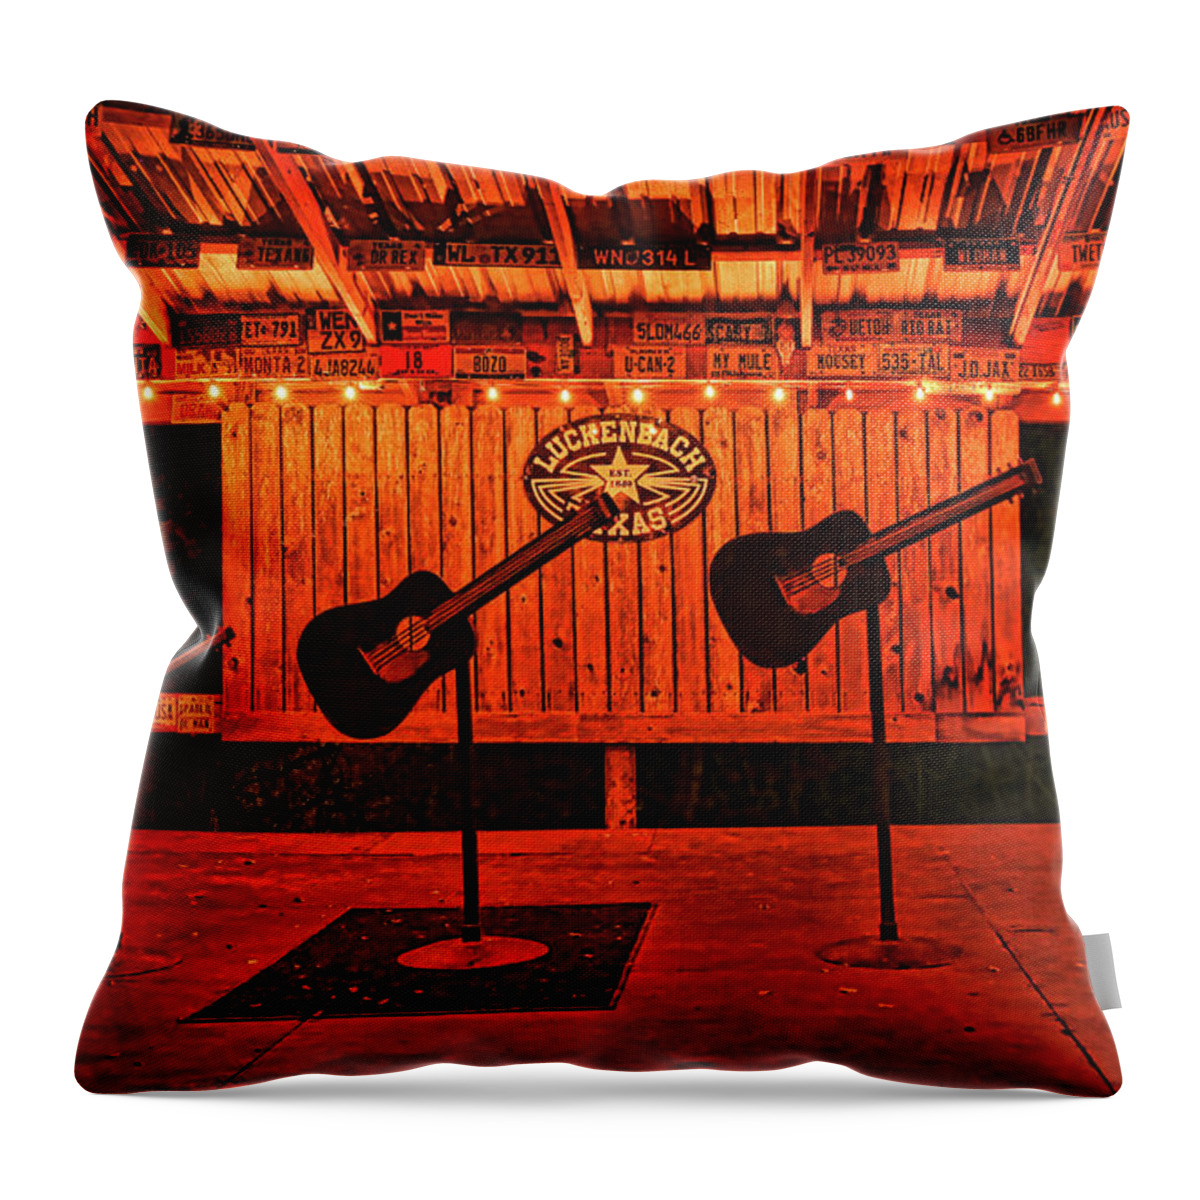 Luckenbach Throw Pillow featuring the photograph The Luckenbach Stage by Judy Vincent